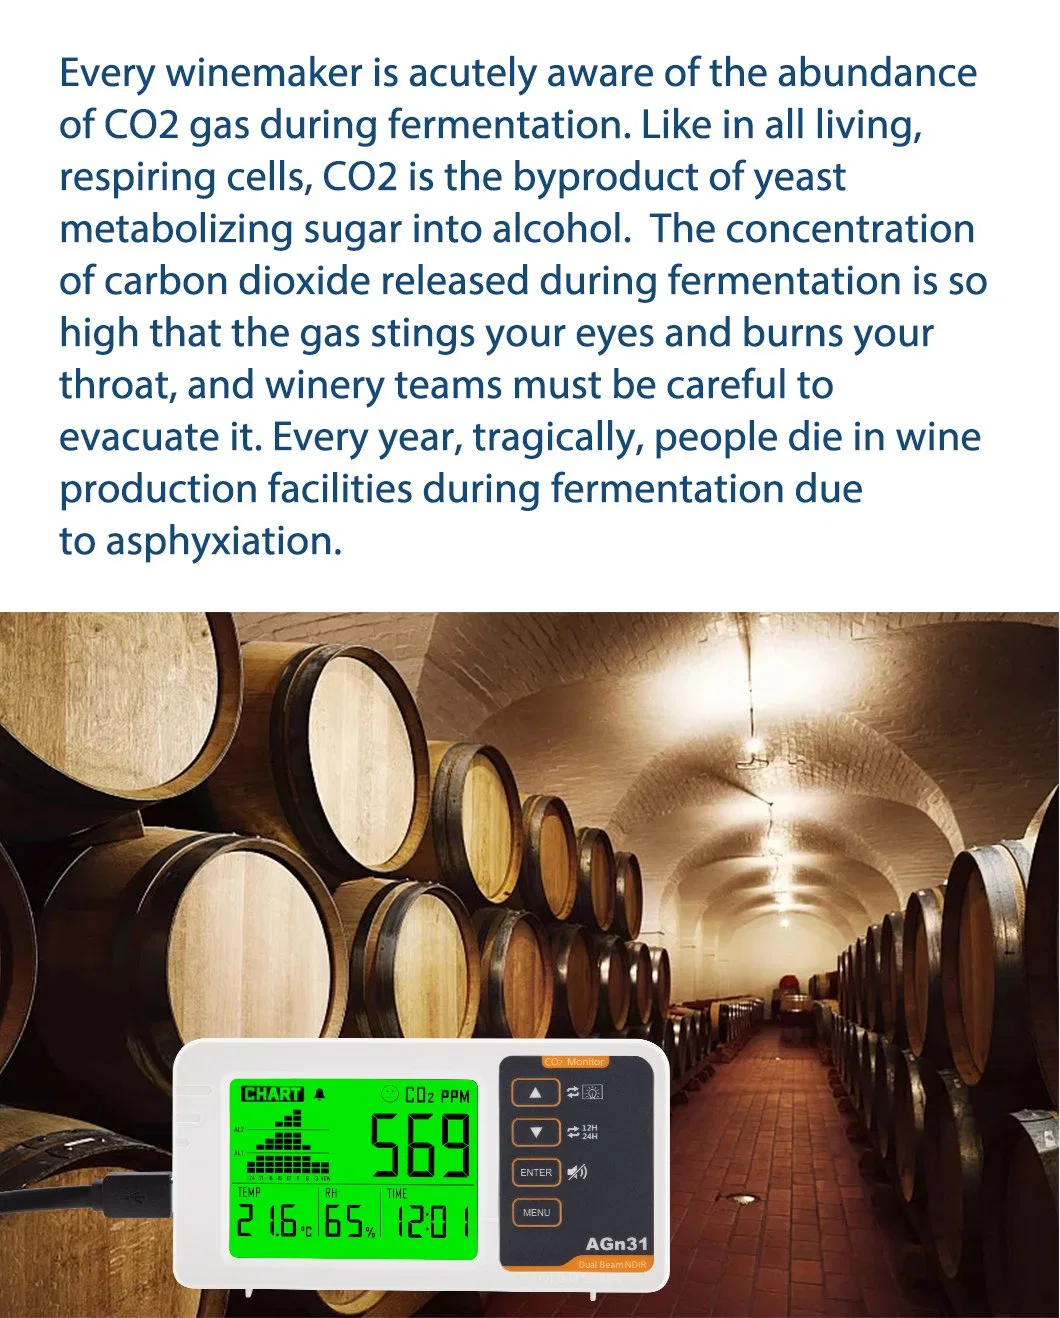 Indoor Air Quality Tester Monitor CO2, Temperature and Relative Humidity with Real Time Clock